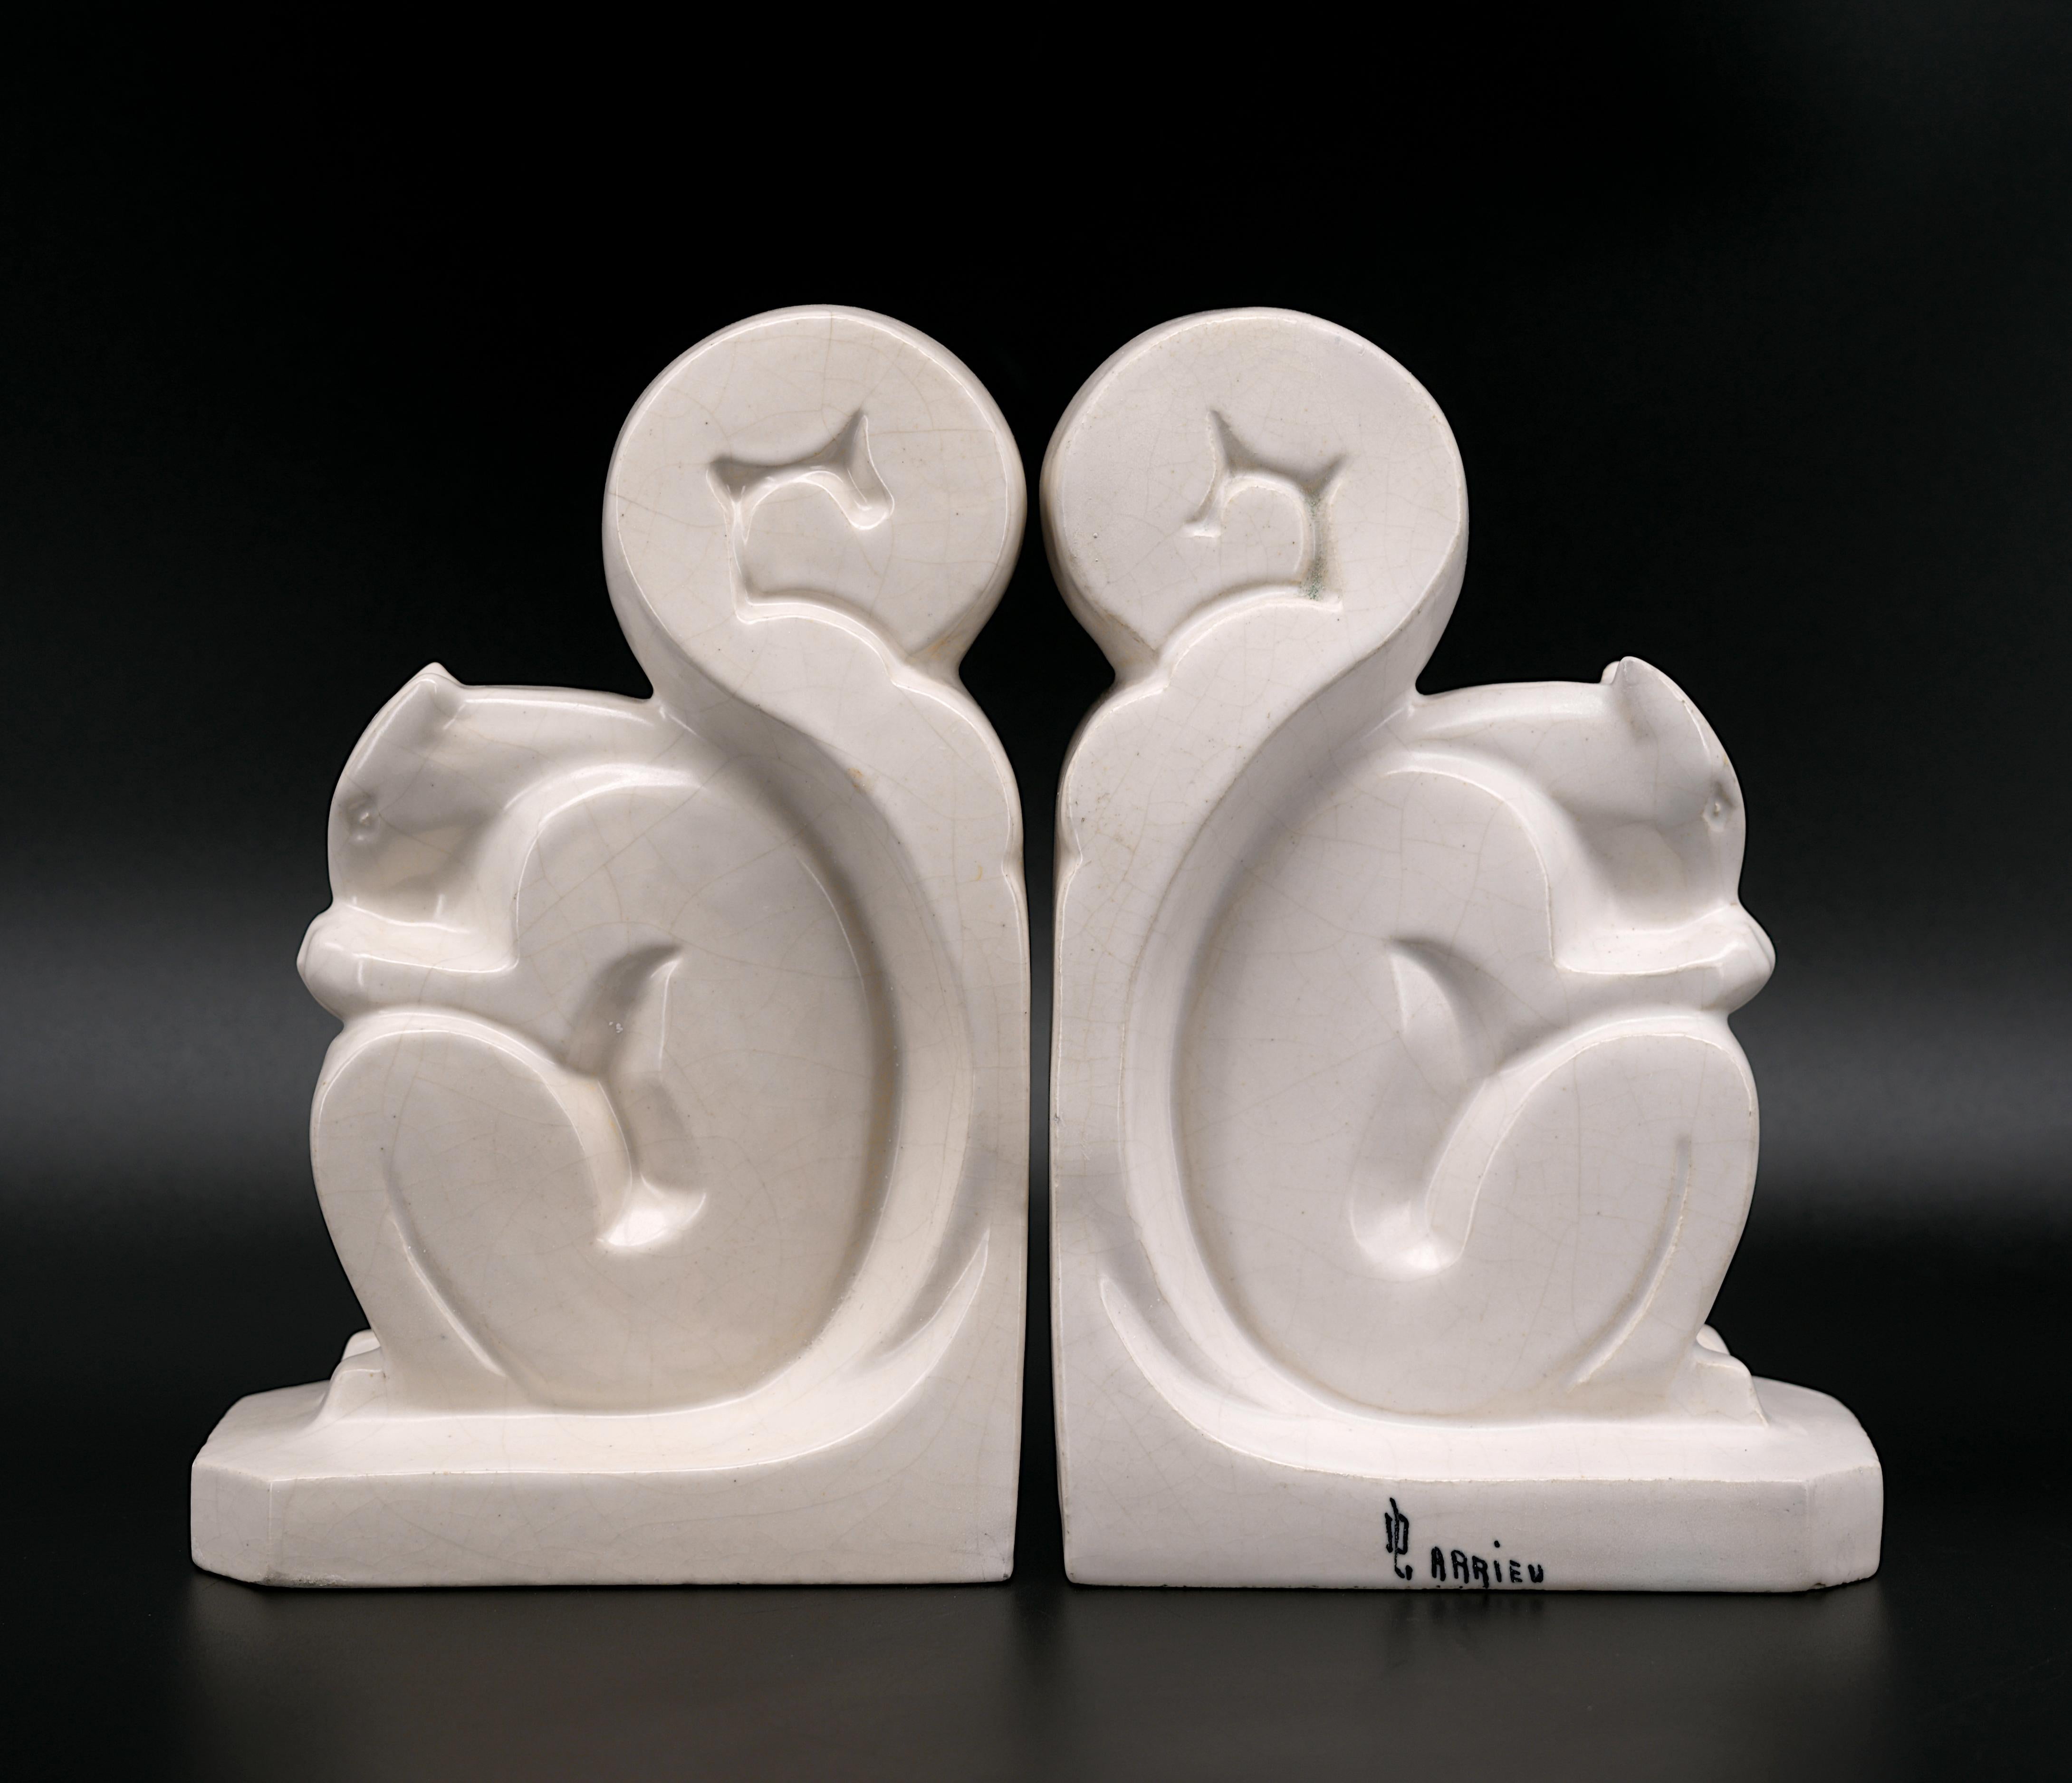 French Art Deco ceramic squirrel bookends by Octave LARRIEU, France, 1930s. Each - Height : 8.4